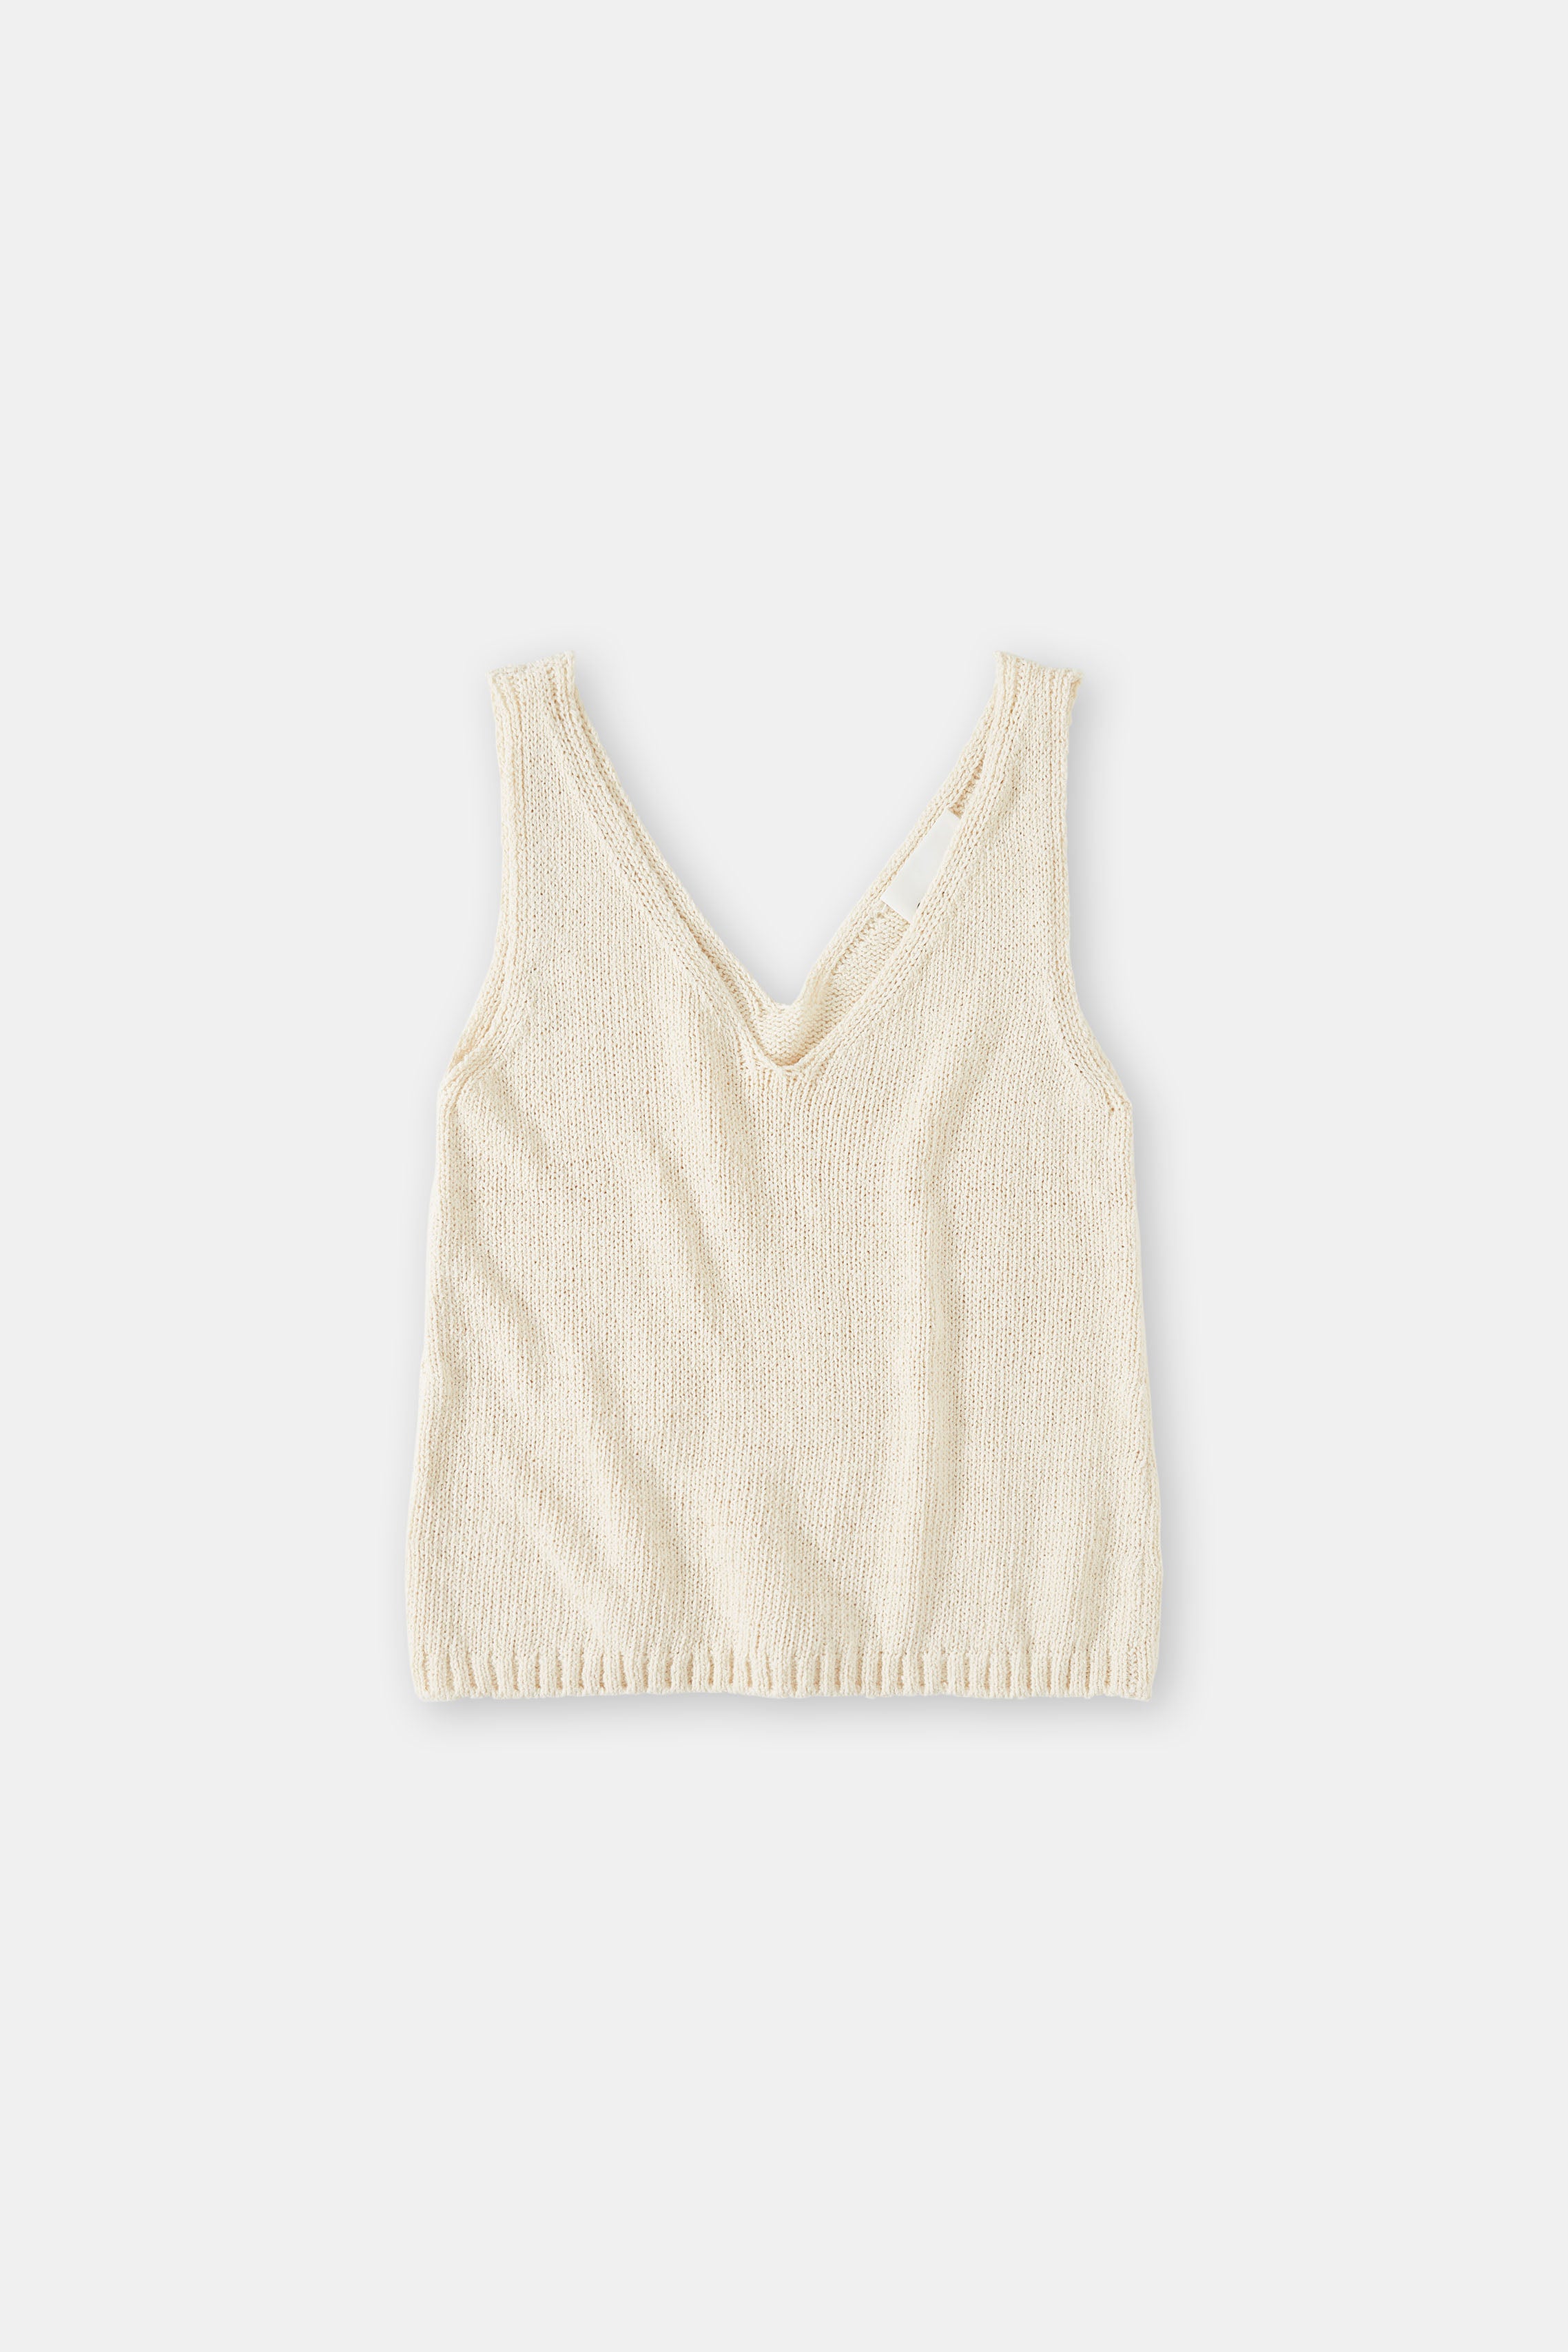 Closed strap top ivory